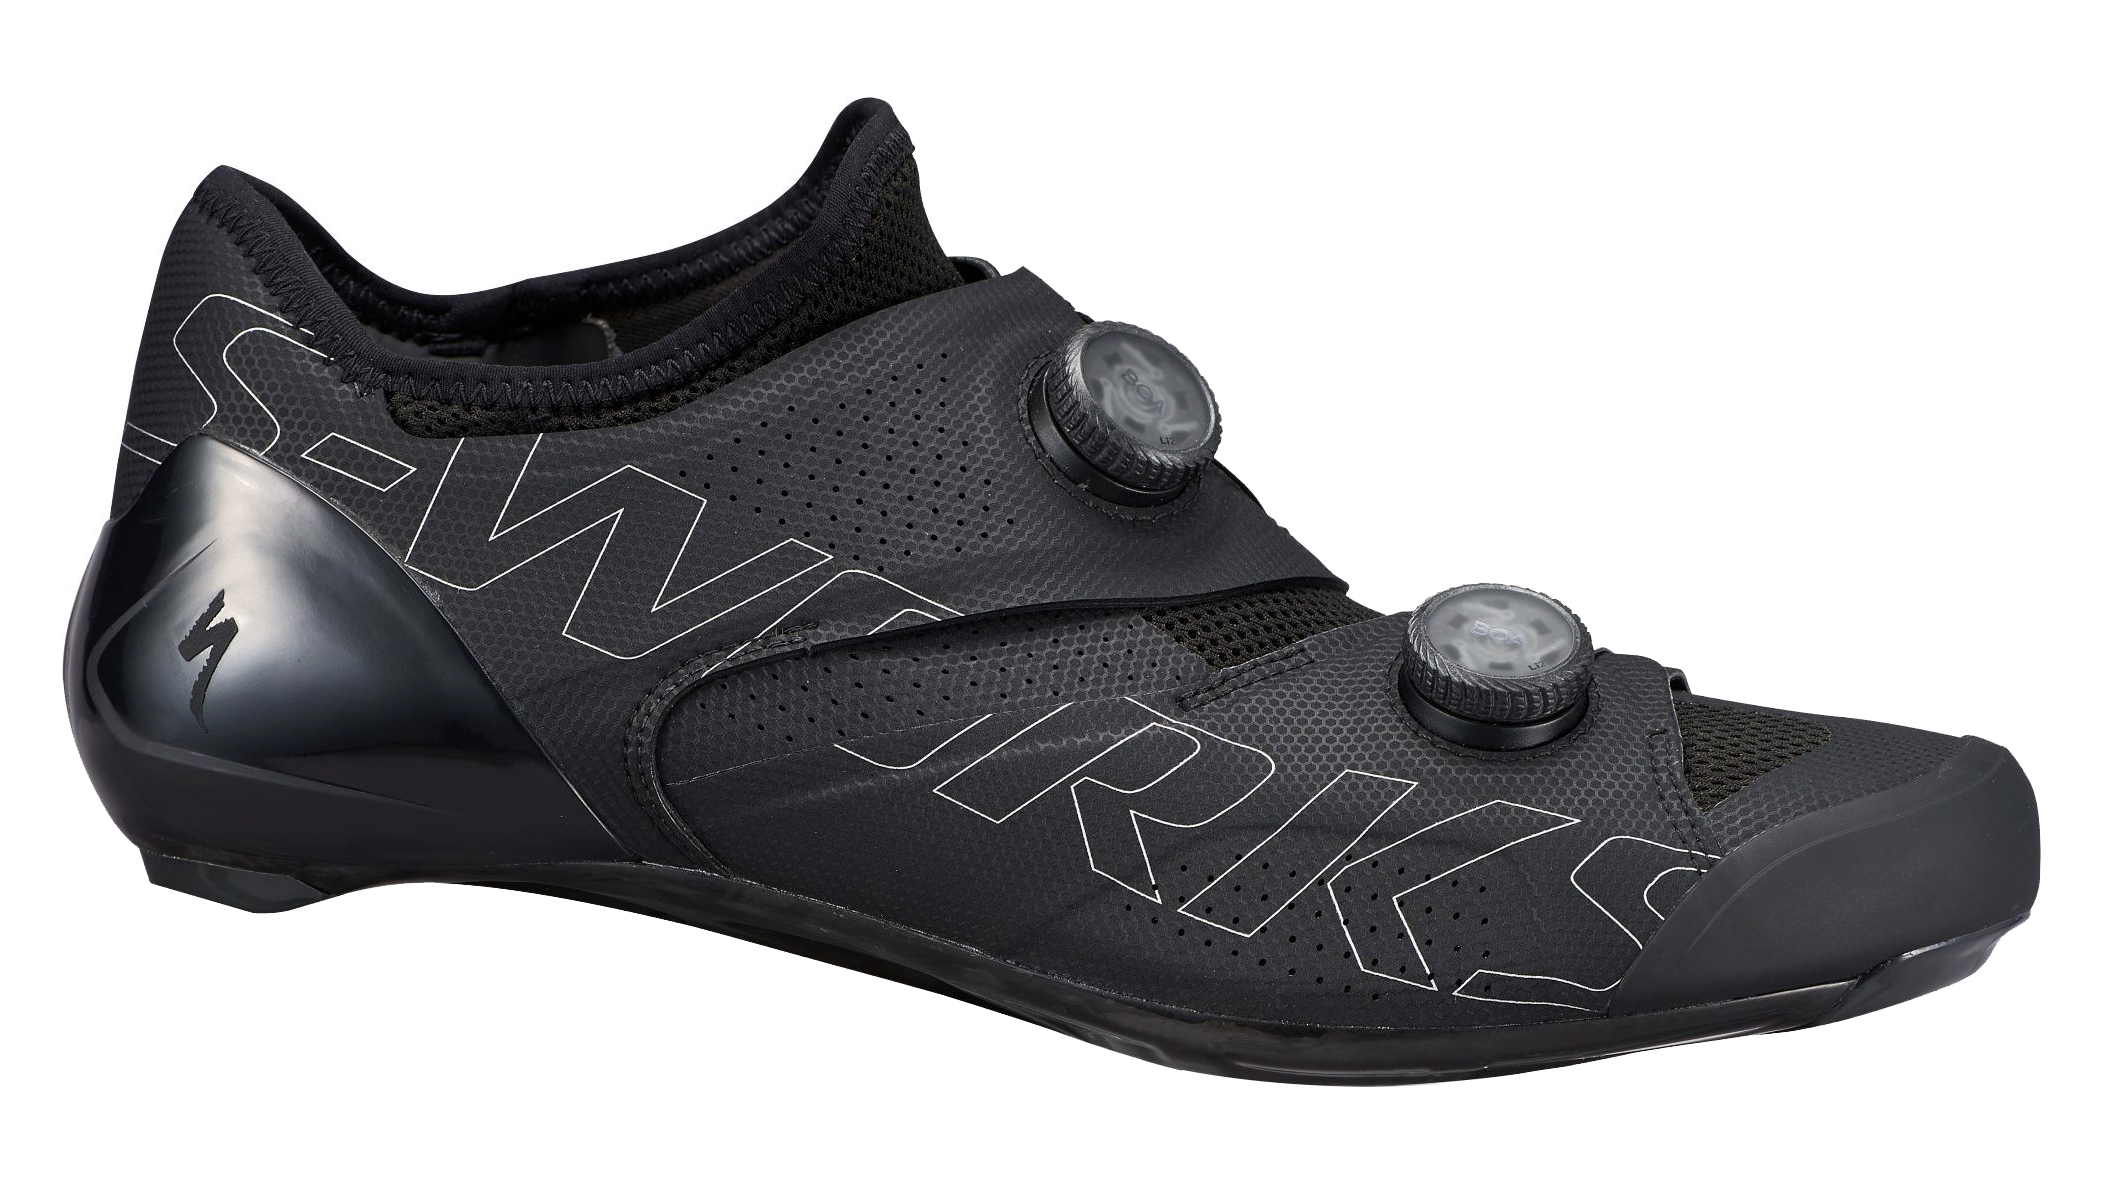 New-Old-Stock Specialized Women's Ember Road Shoes Black w/White BOA 2/3 Bolt 